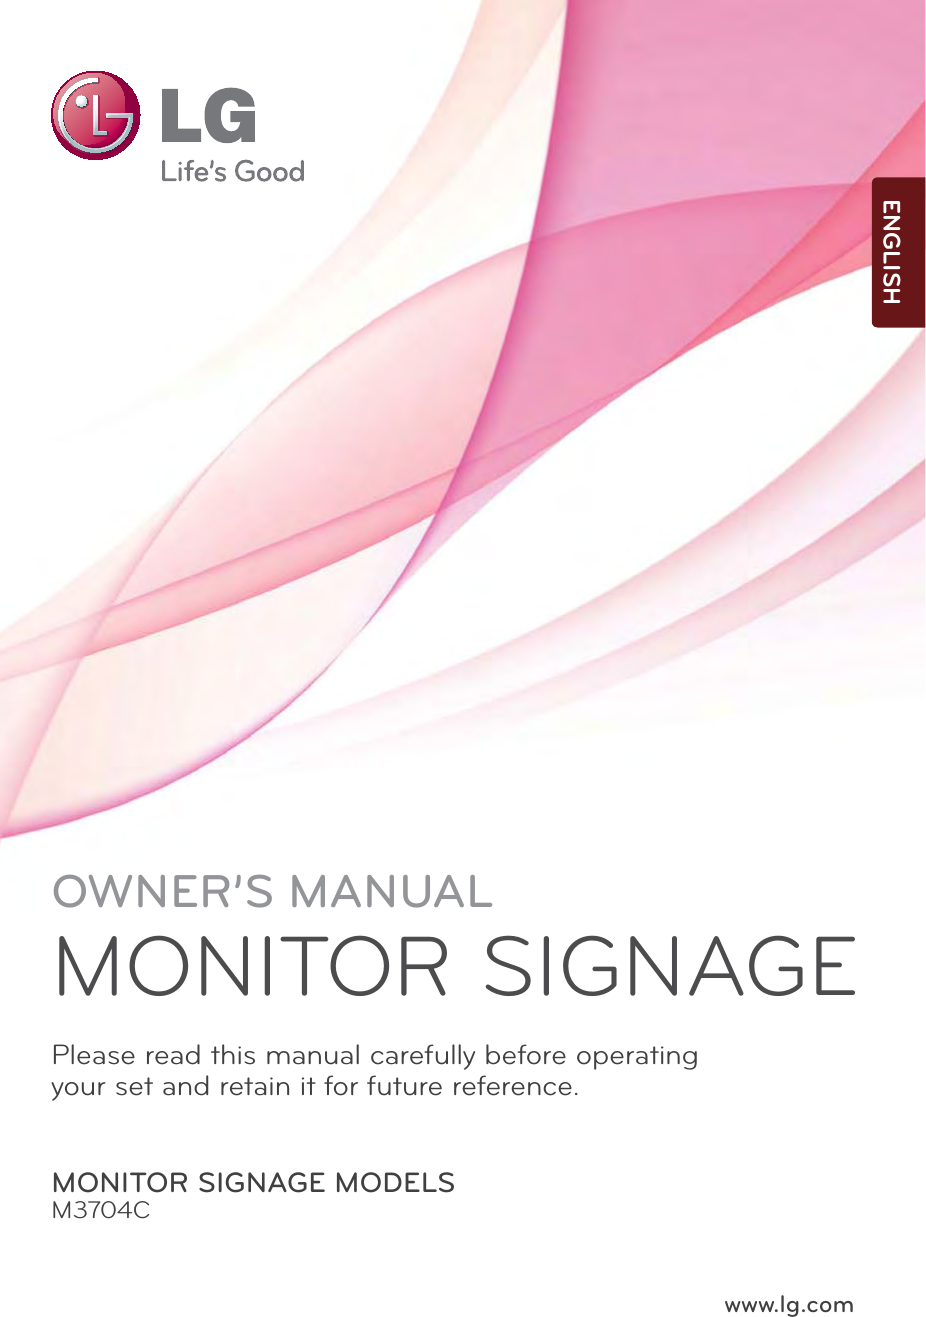 www.lg.comOWNER’S MANUALMONITOR SIGNAGEMONITOR SIGNAGE MODELSM3704CPlease read this manual carefully before operatingyour set and retain it for future reference.ENGLISH